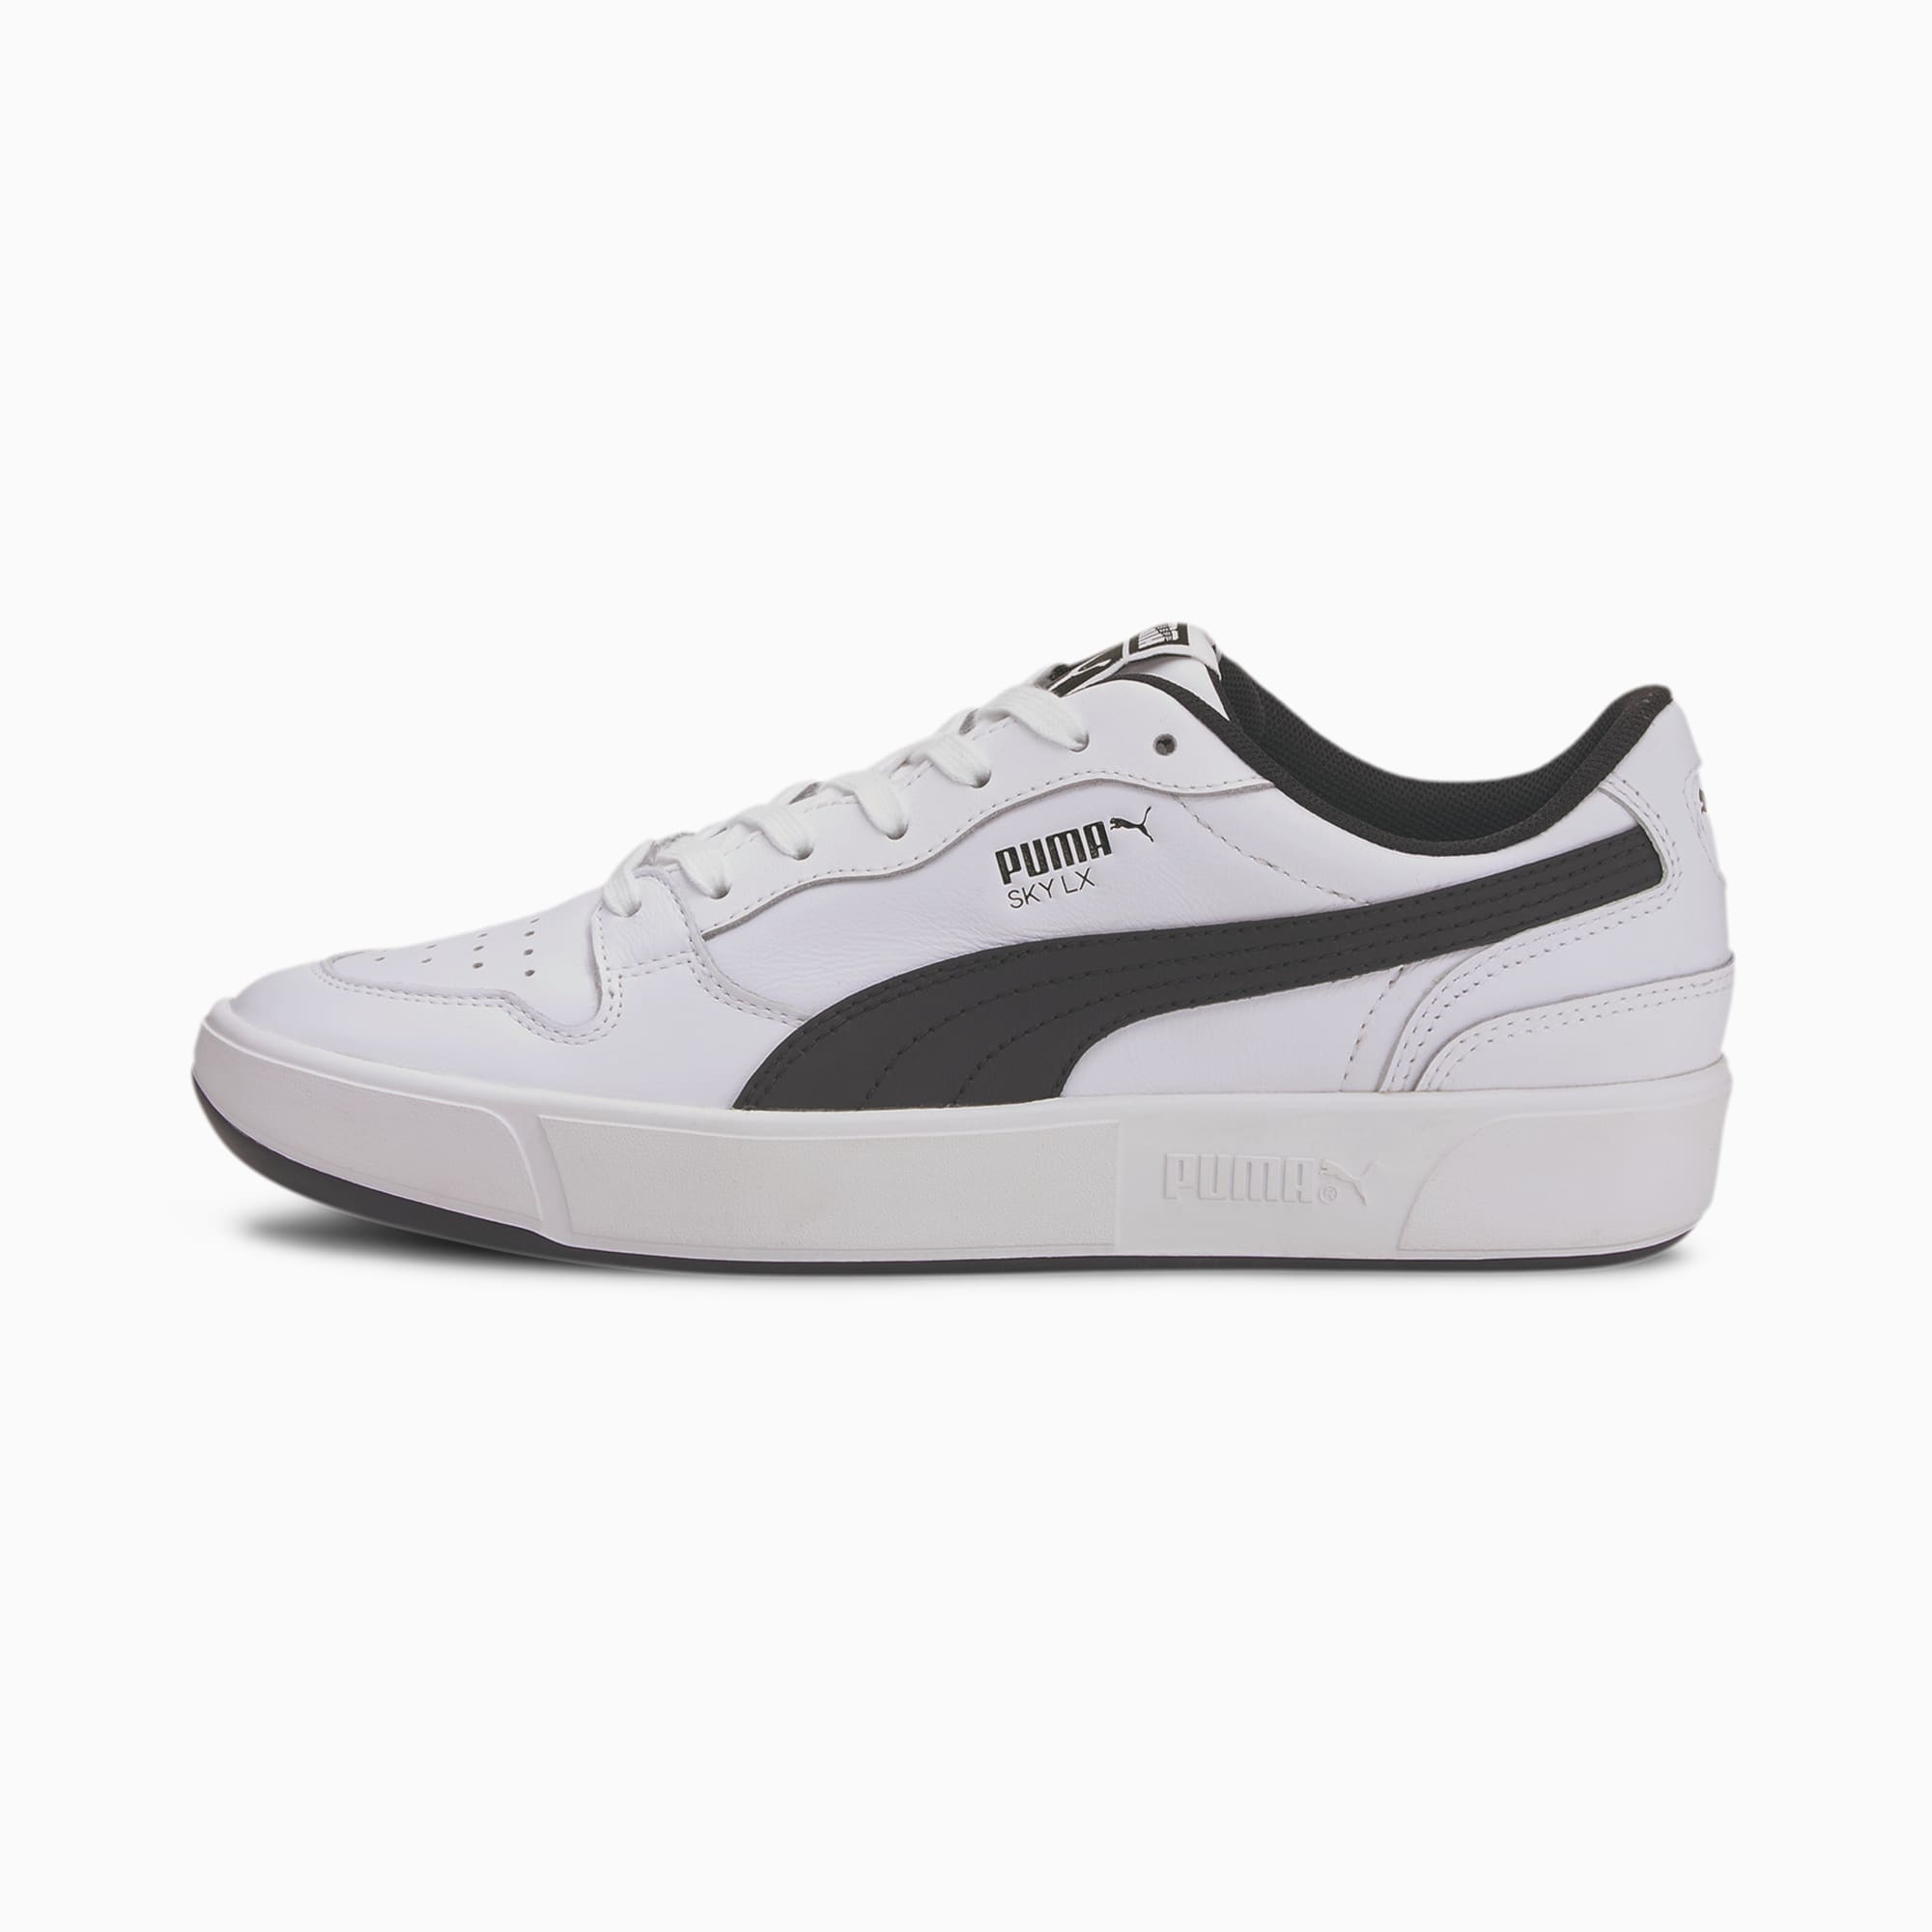 PUMA Chaussure Basket Sky LX Low, Blanc/Noir, Taille 37.5, Chaussures